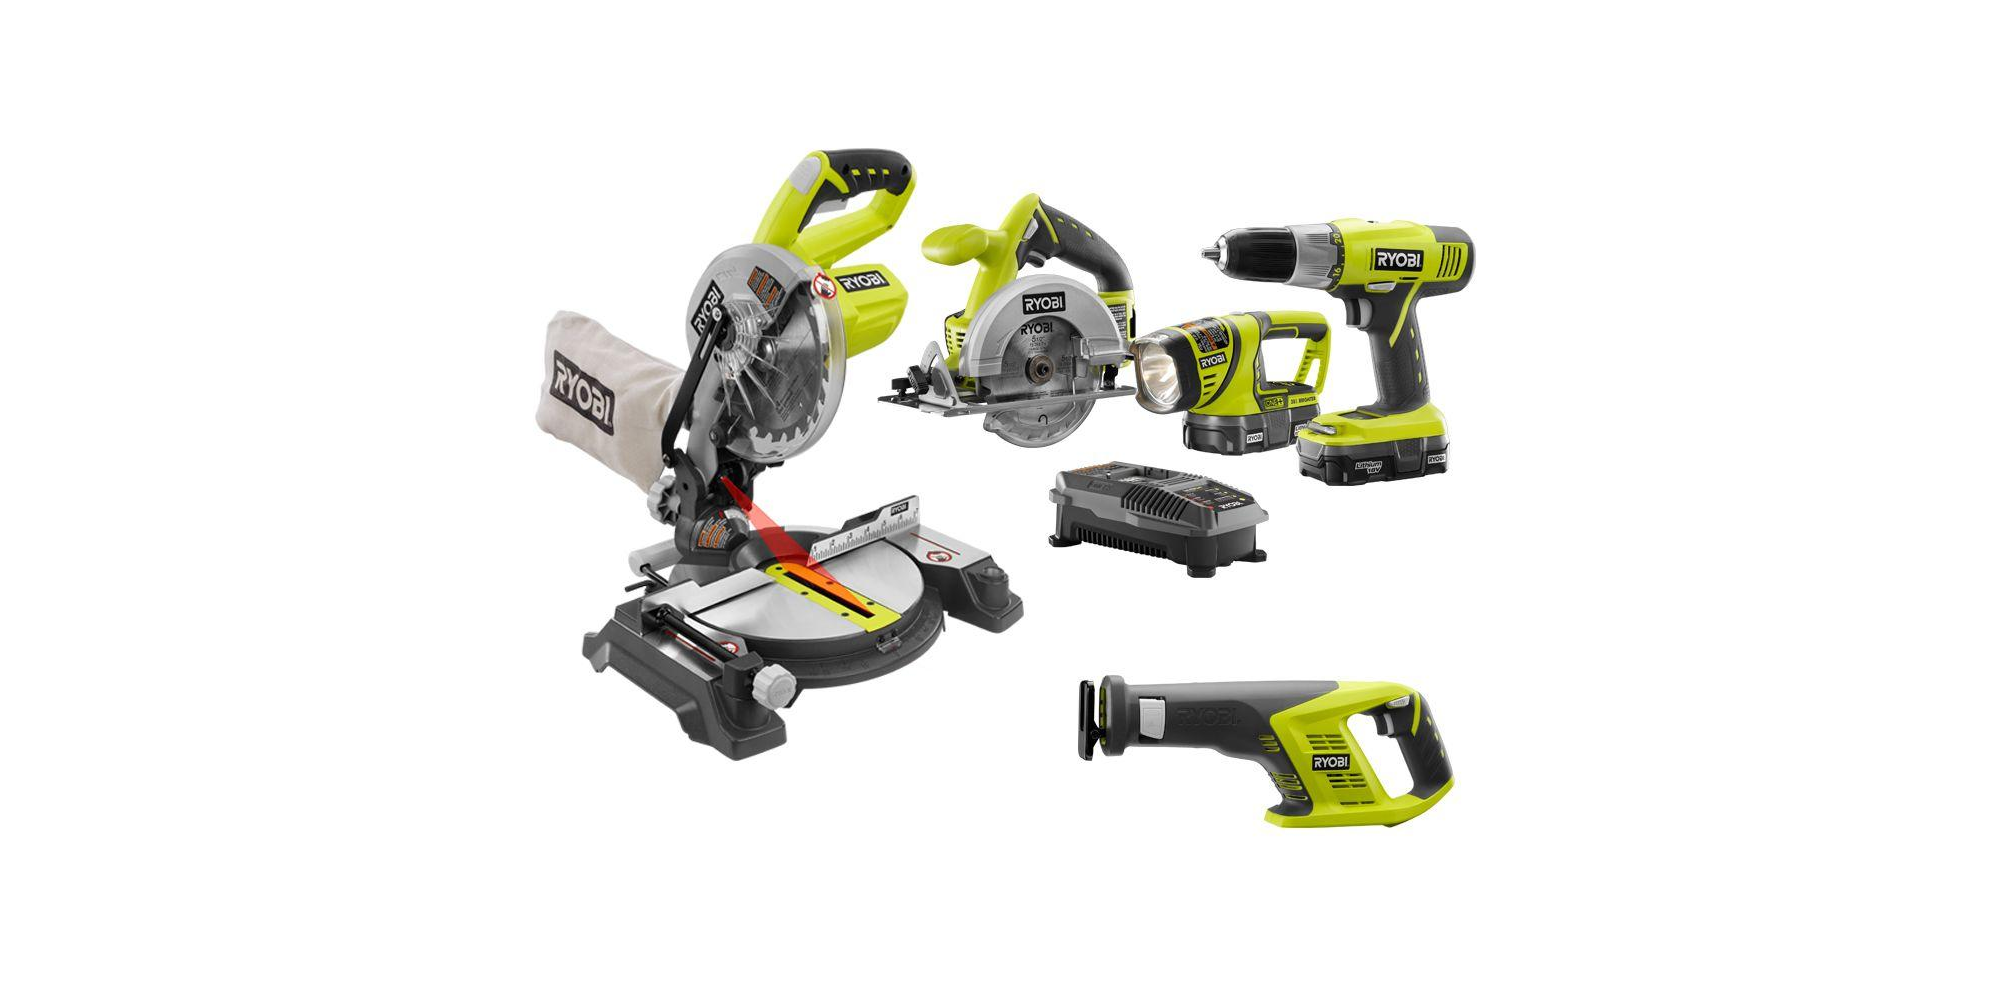 Ryobi ONE+ 18-Volt Lithium-Ion Cordless 5-tool Combo Kit with Miter Saw—$199.00!